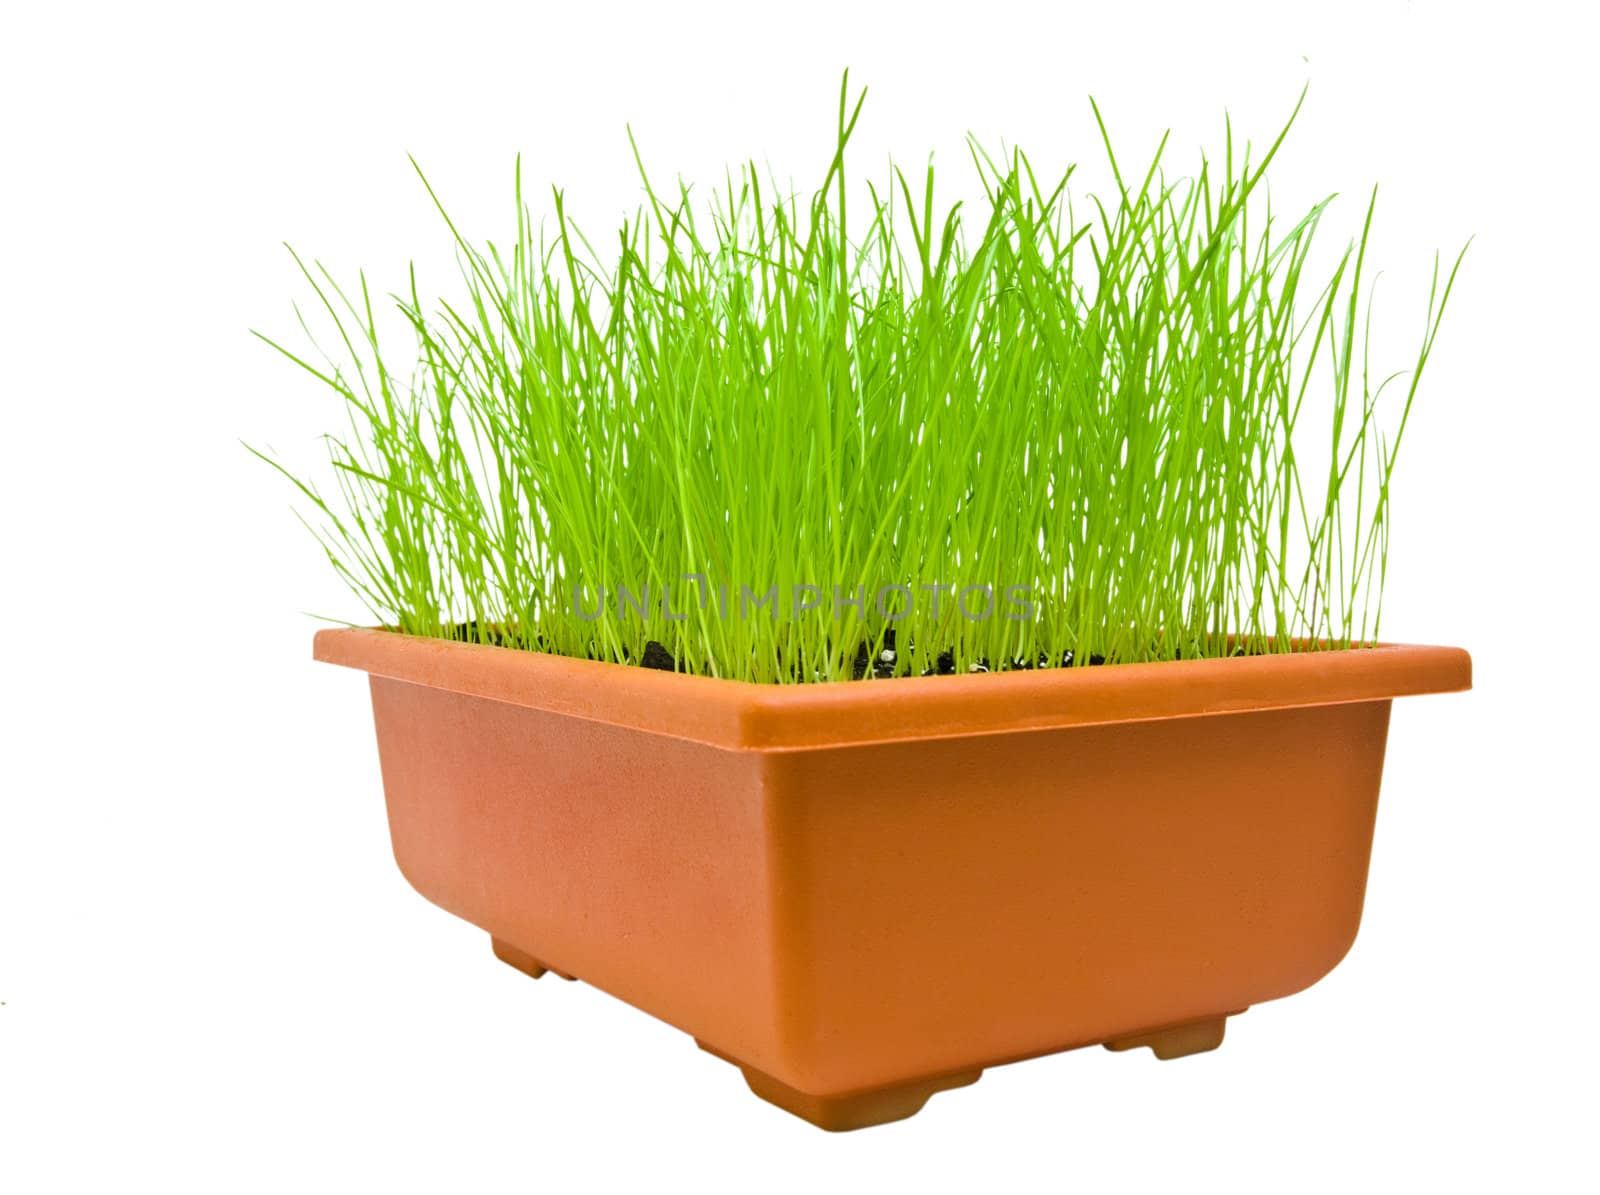 Isolated green grass in the flowerpot over the white background